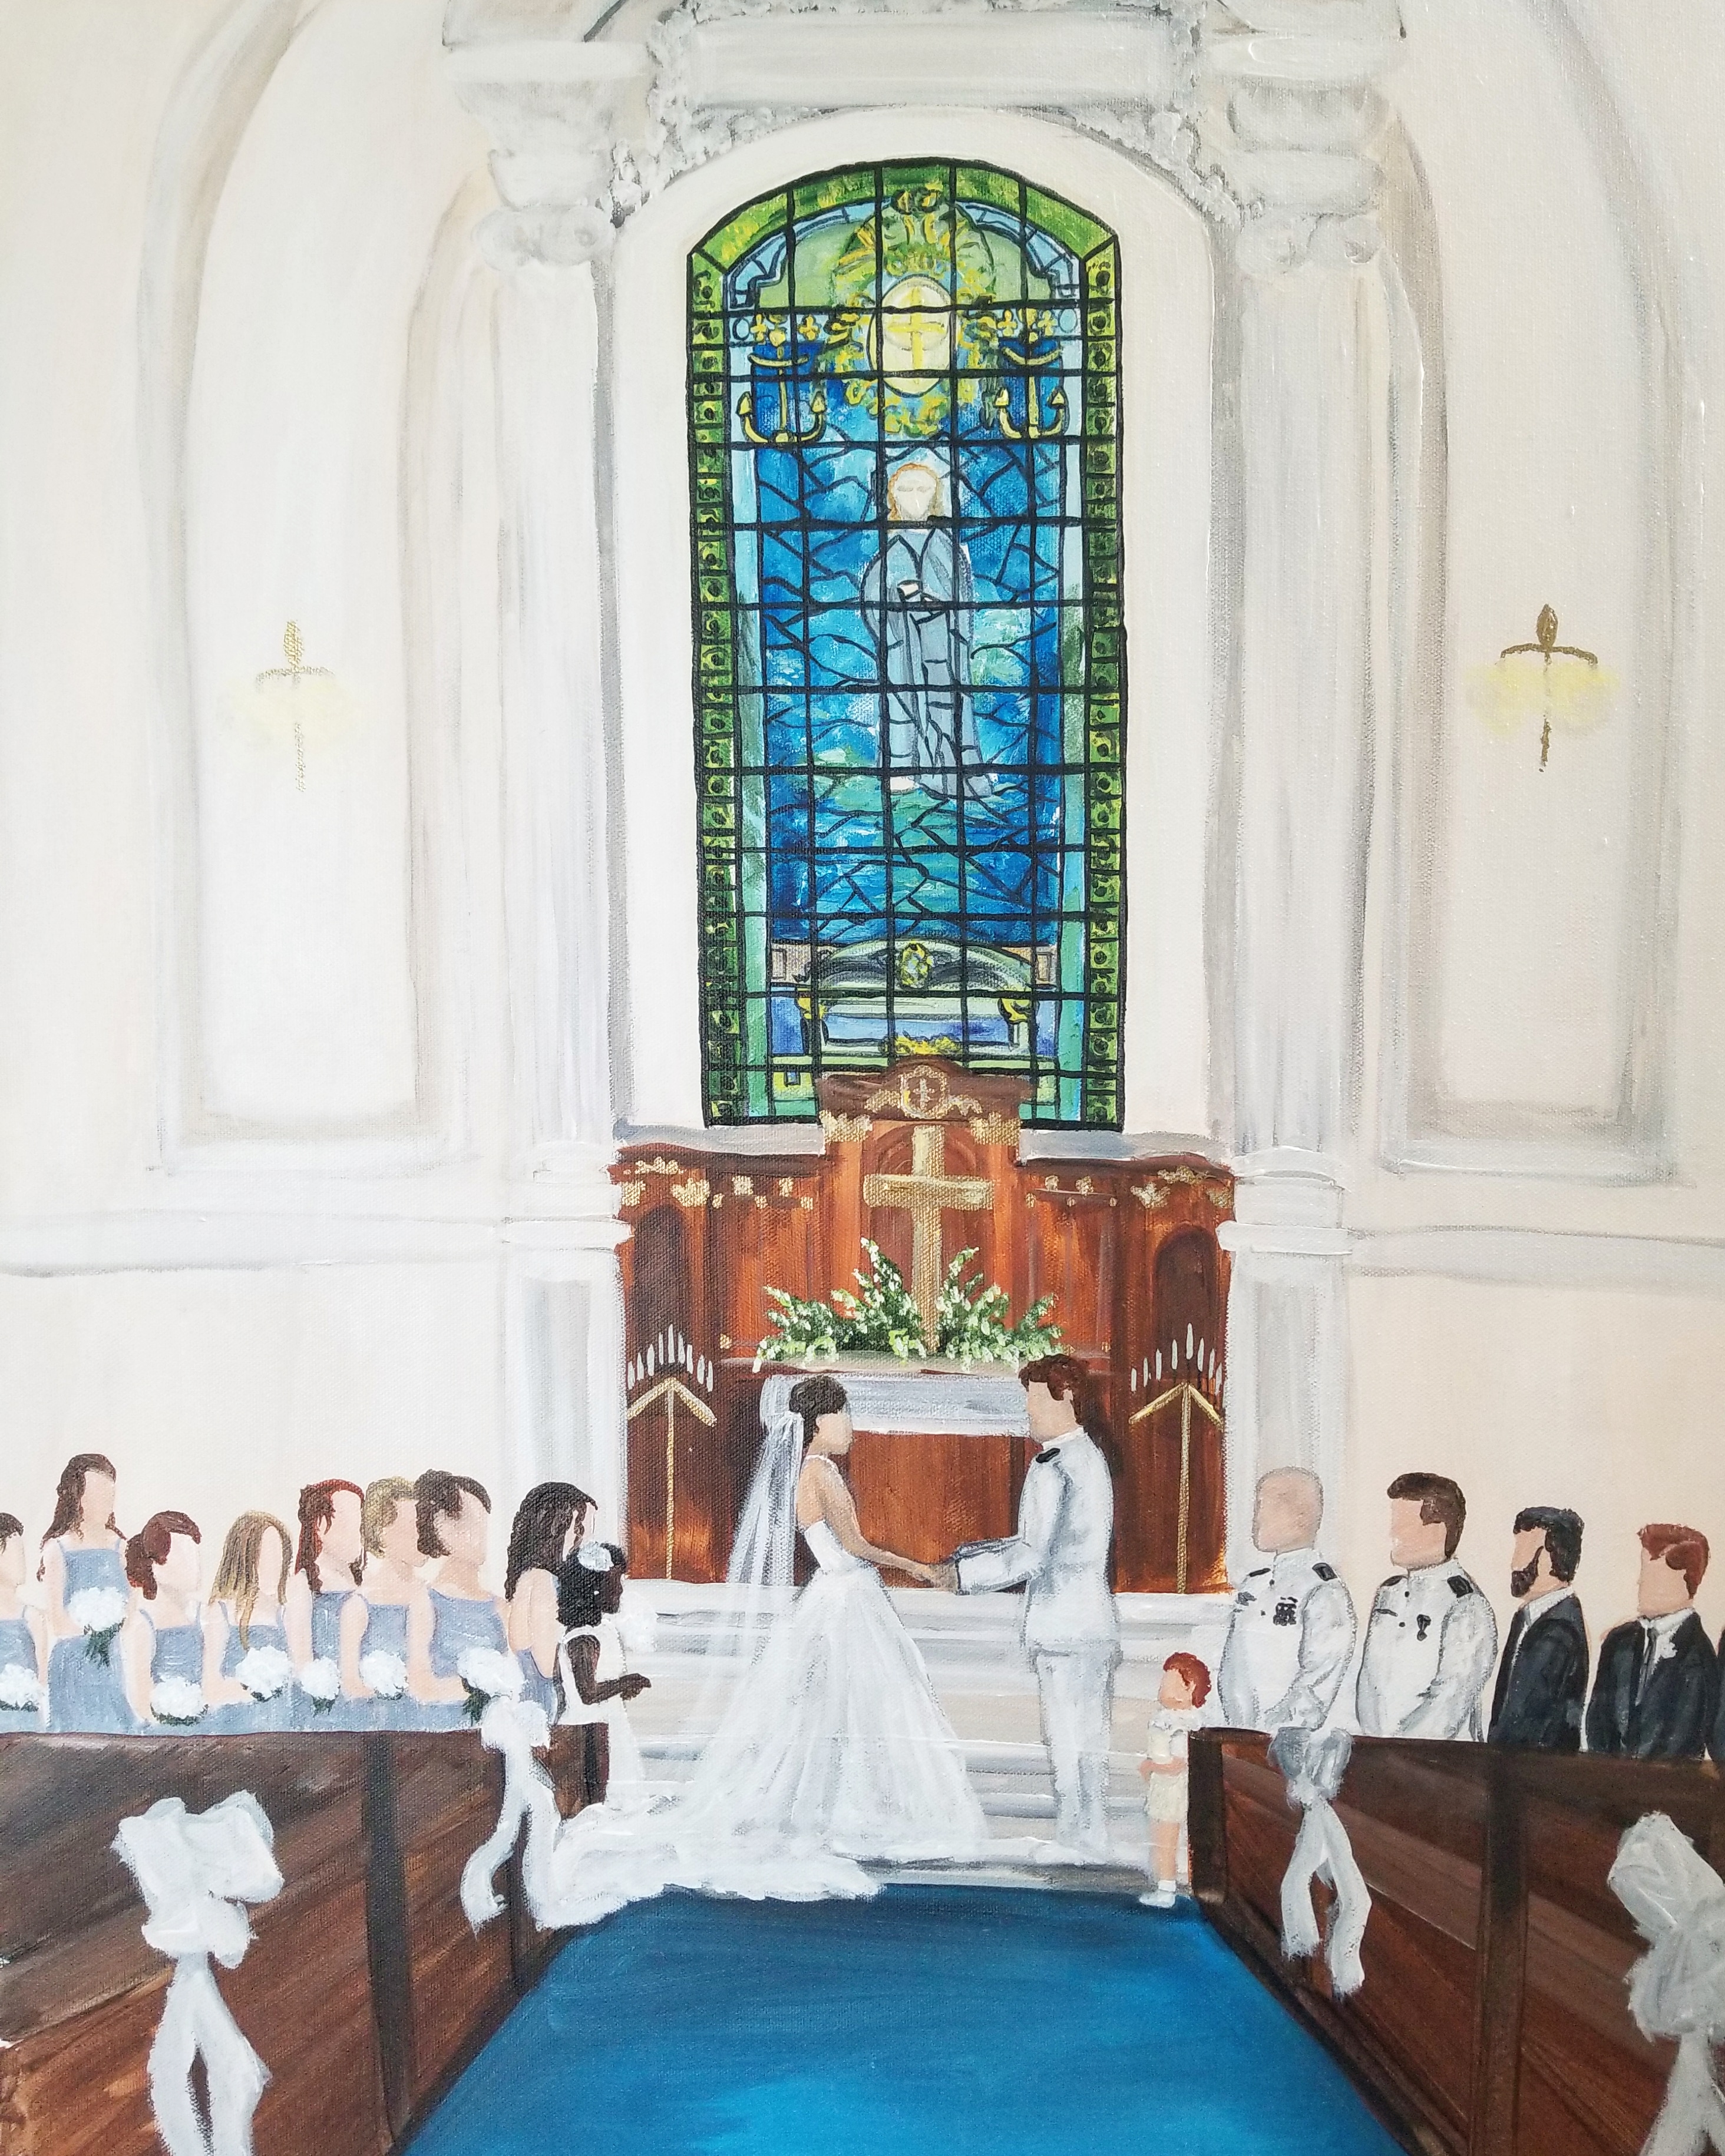 A completed live wedding painting at the US Naval Academy Chapel